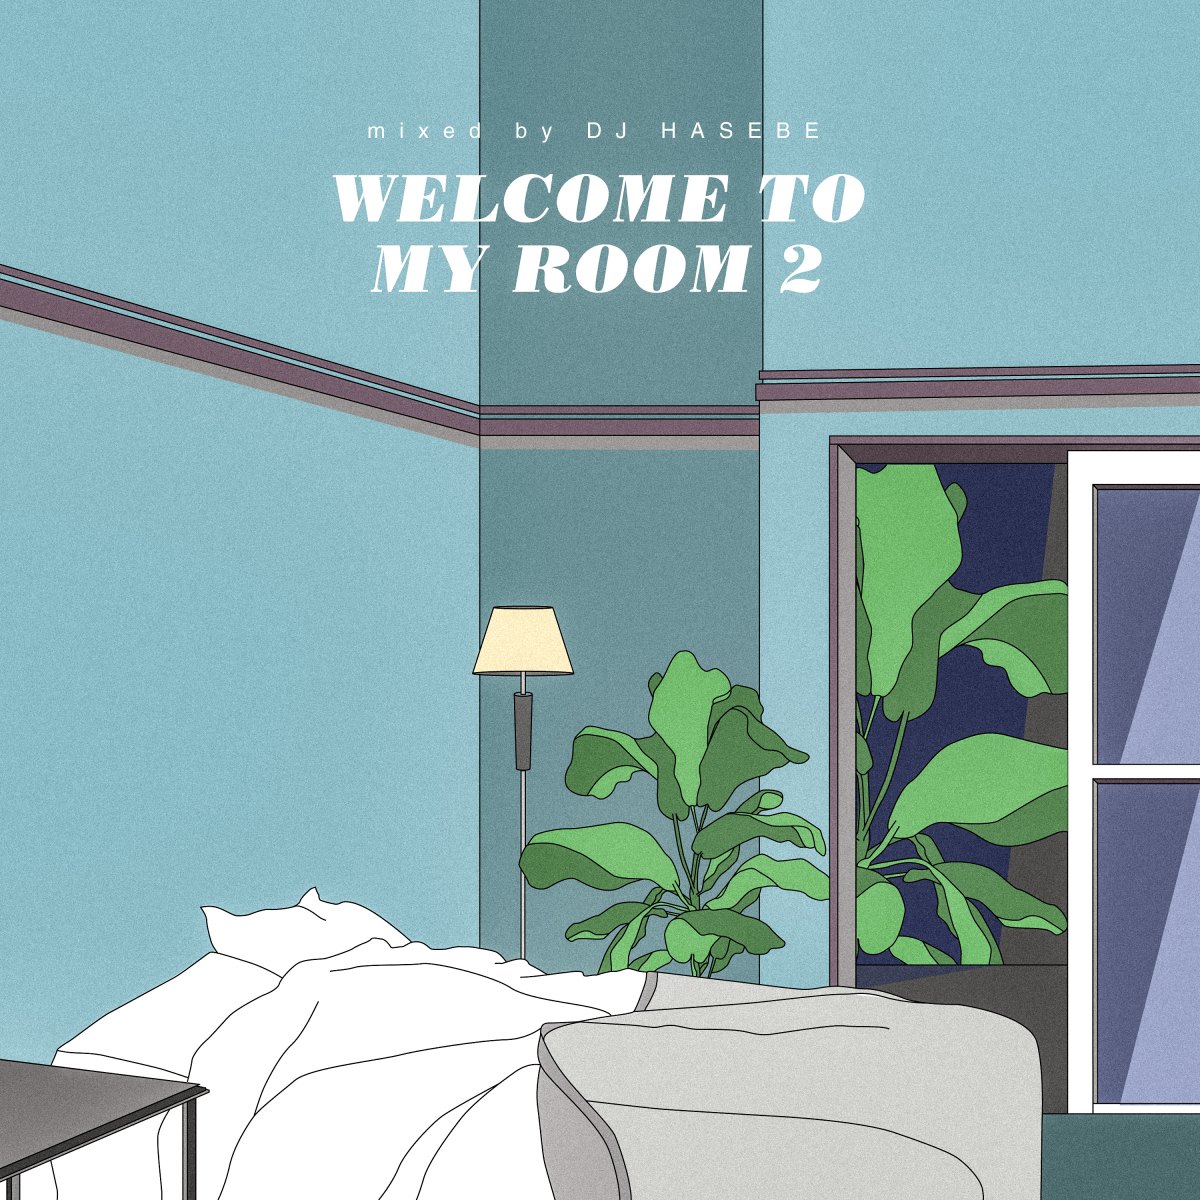 DJ HASEBEのMIX企画『Welcome to my room 2』が配信リリース。5月にはCD版も発売決定 | block.fm